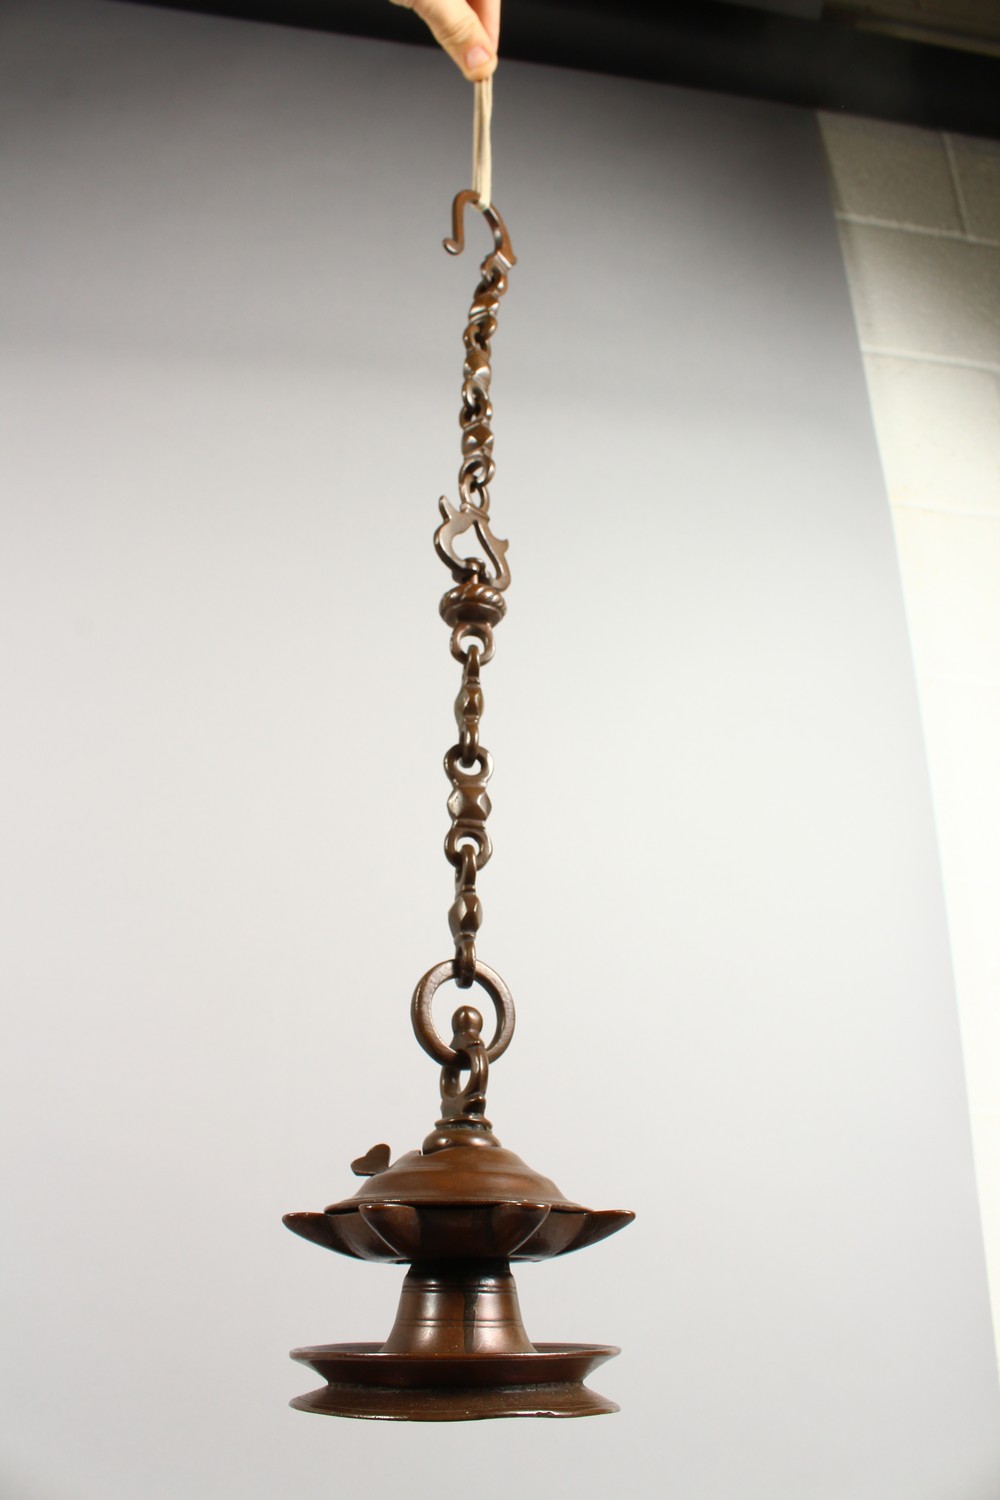 AN 18TH CENTURY JEWISH HANGING BRONZE OIL LAMP with chain. Lamp: 5.5ins high. - Image 2 of 6